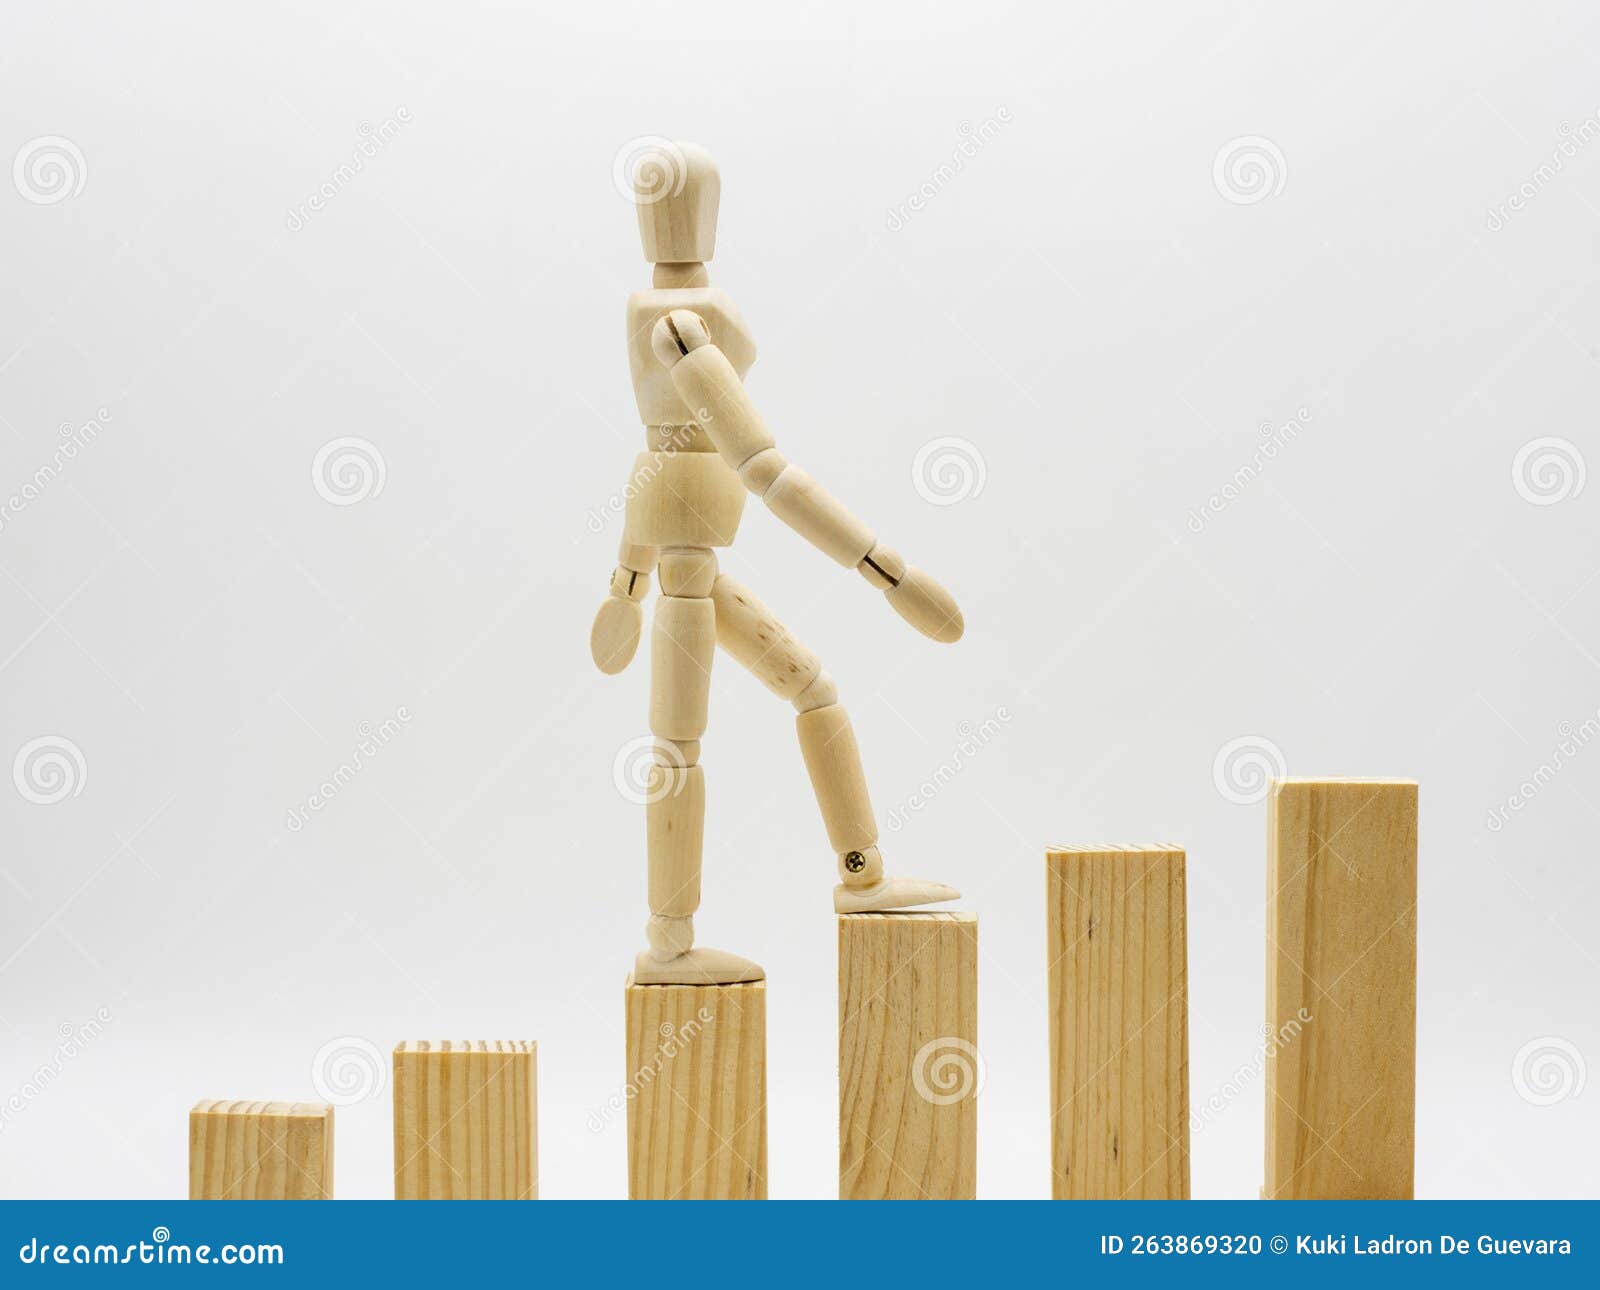 wooden mannequin climbing a ladder,  on white